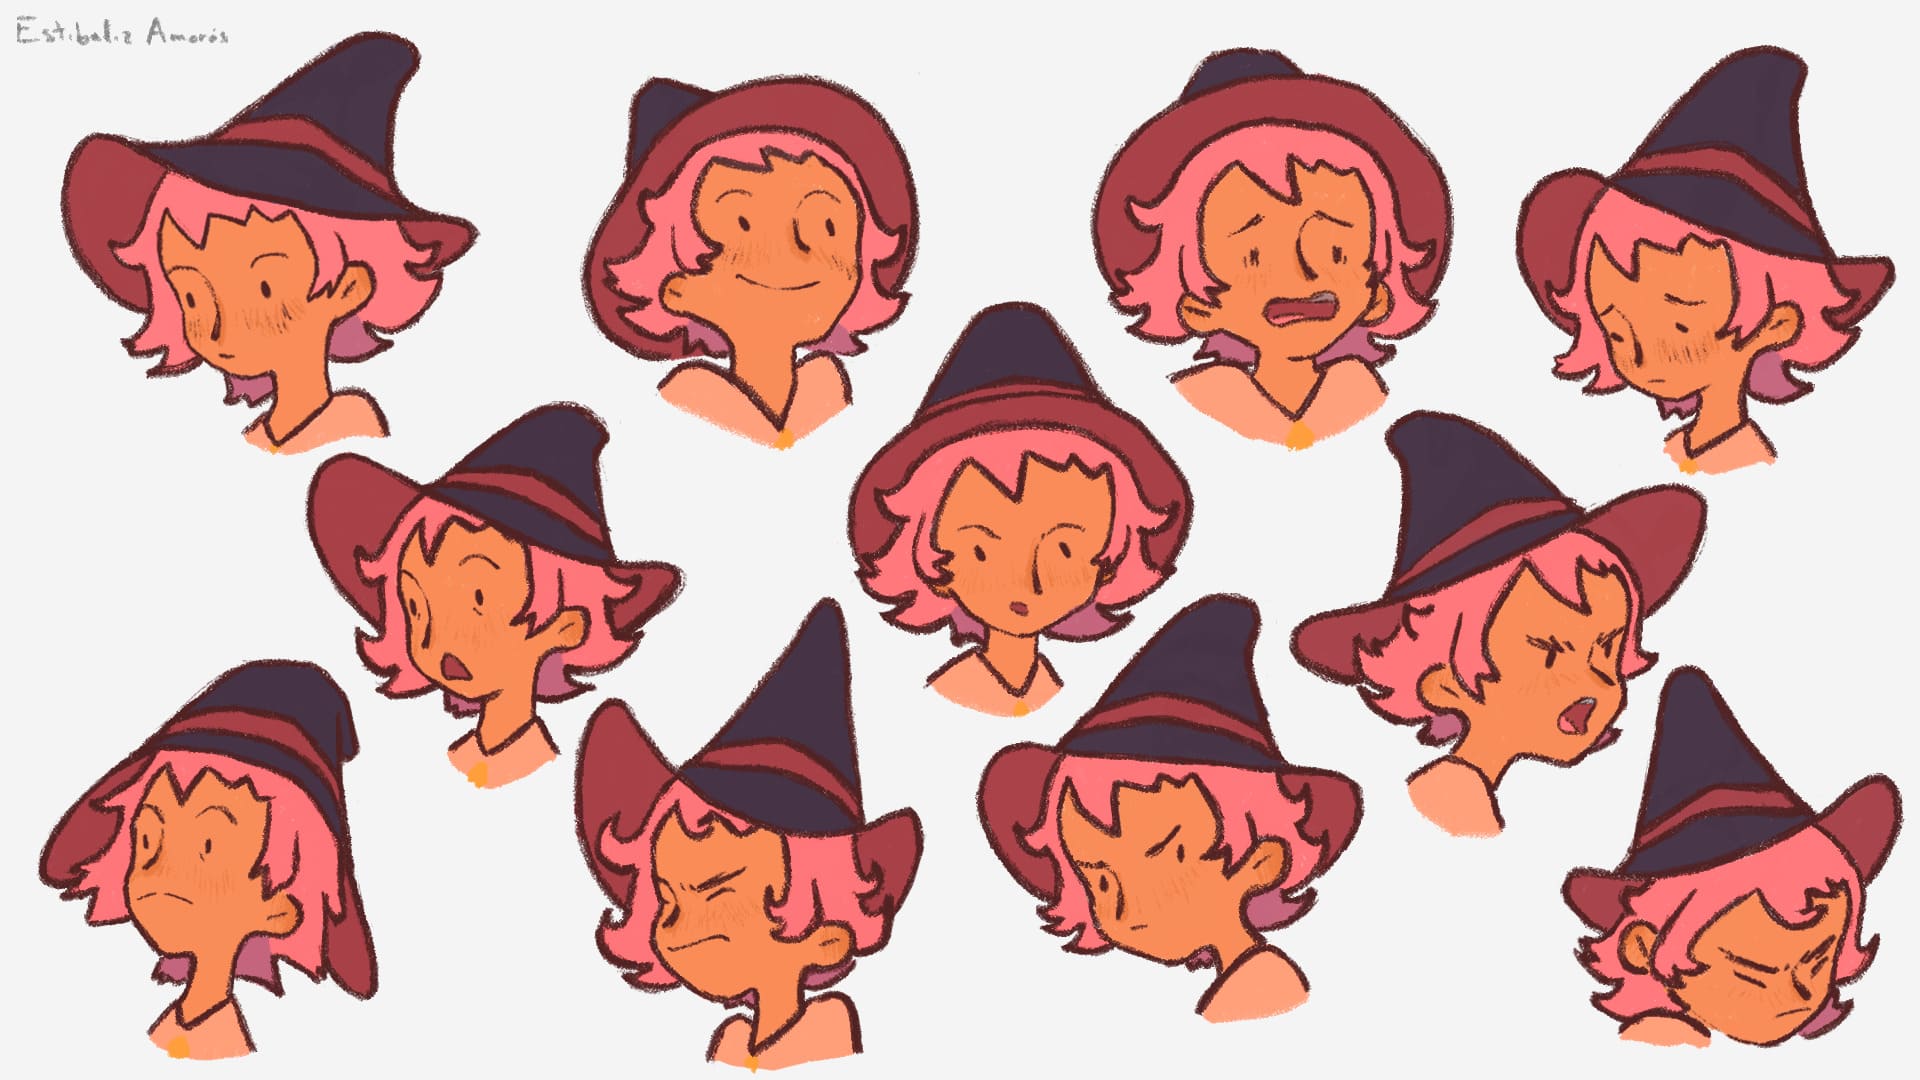 Facial drawings of a young witch in her different moods.